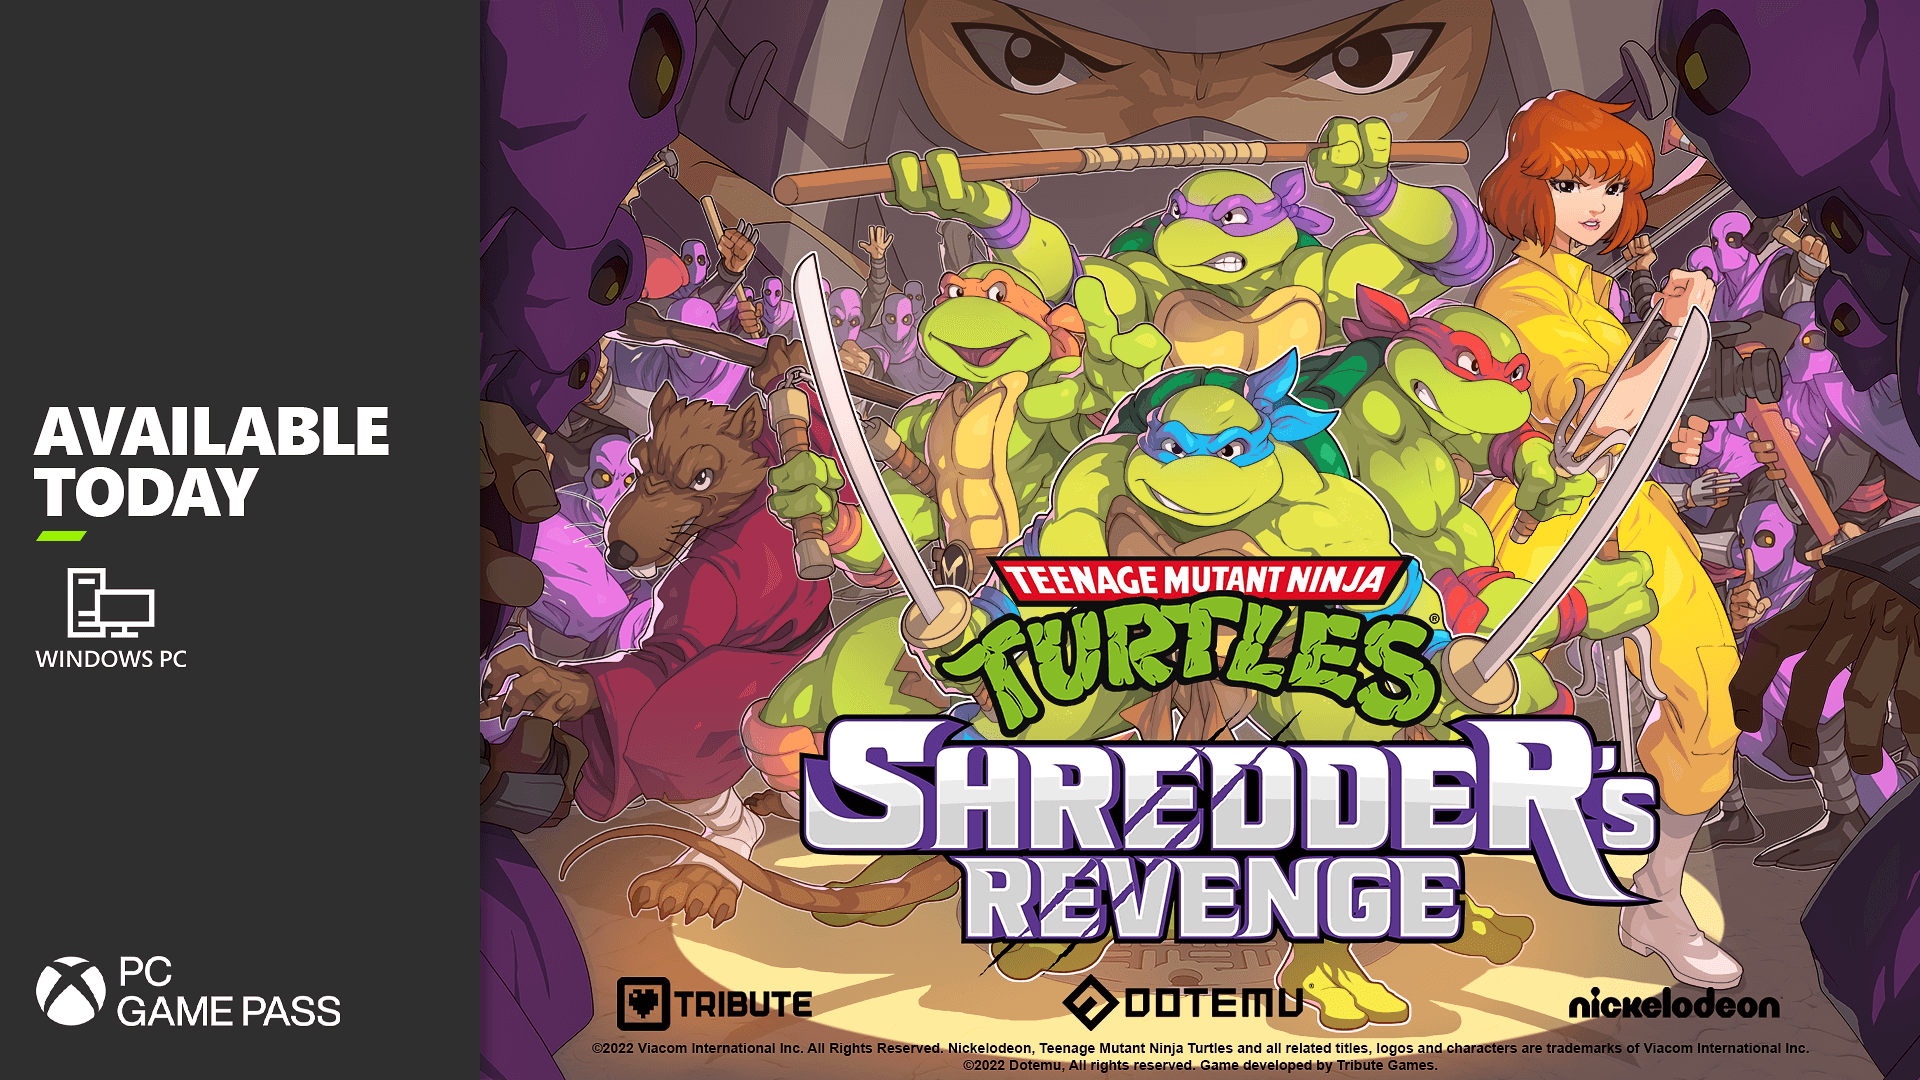 Teenage Mutant Ninja Turtles: Shredder's Revenge is available today with PC Game Pass.